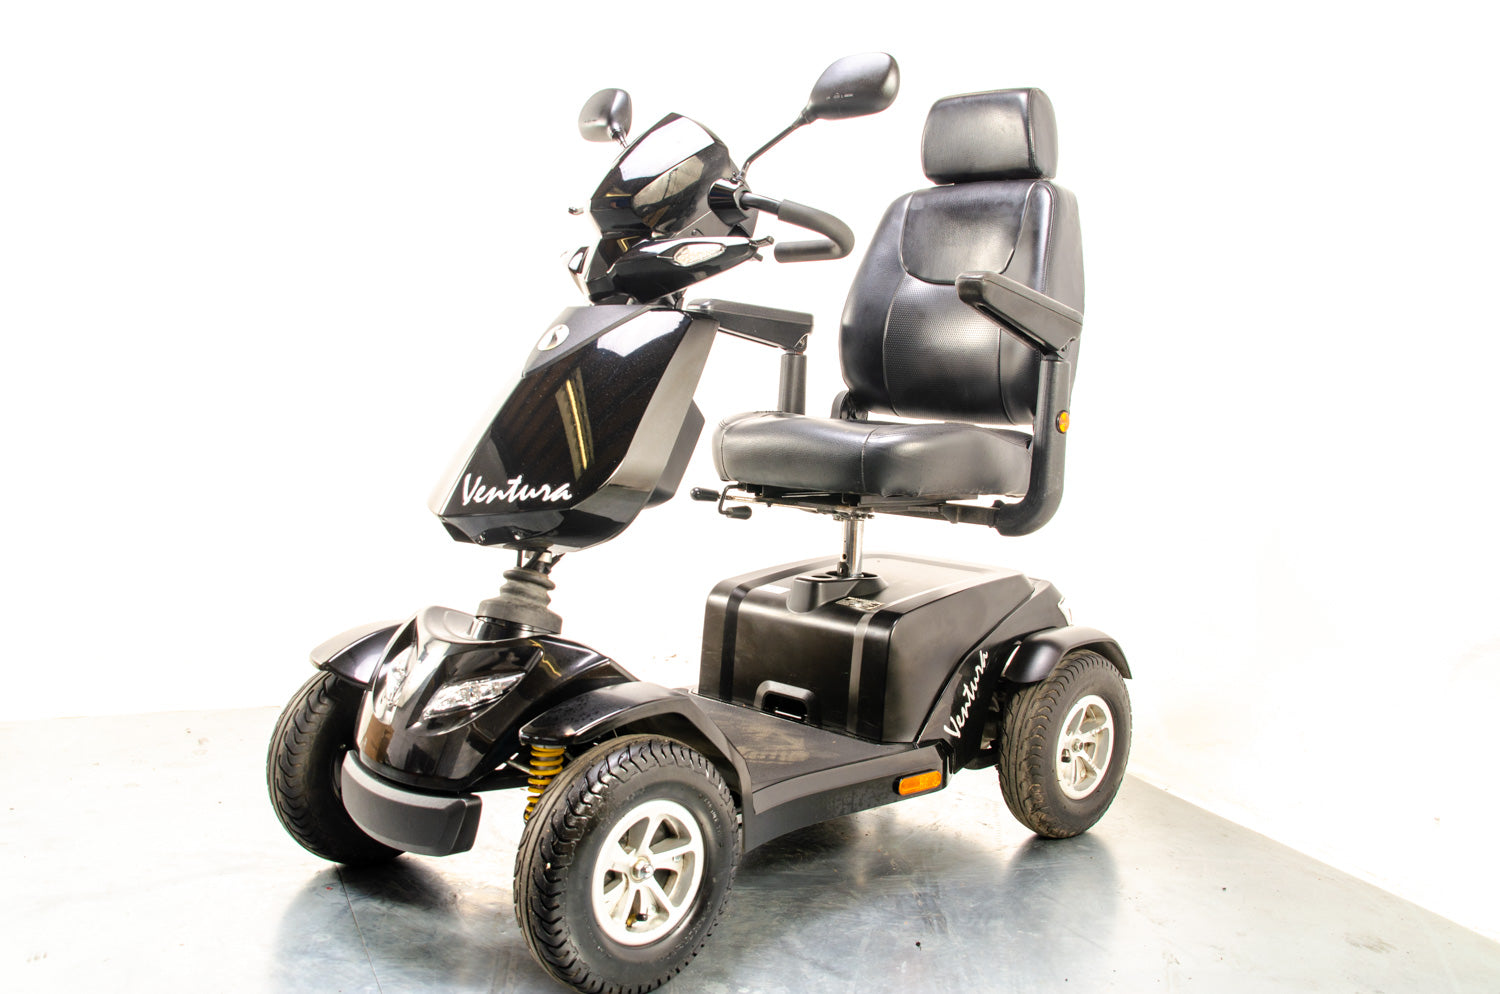 Rascal Ventura 8mph Used Electric Mobility Scooter Midsize Modern Road Pavement Class 3 Black